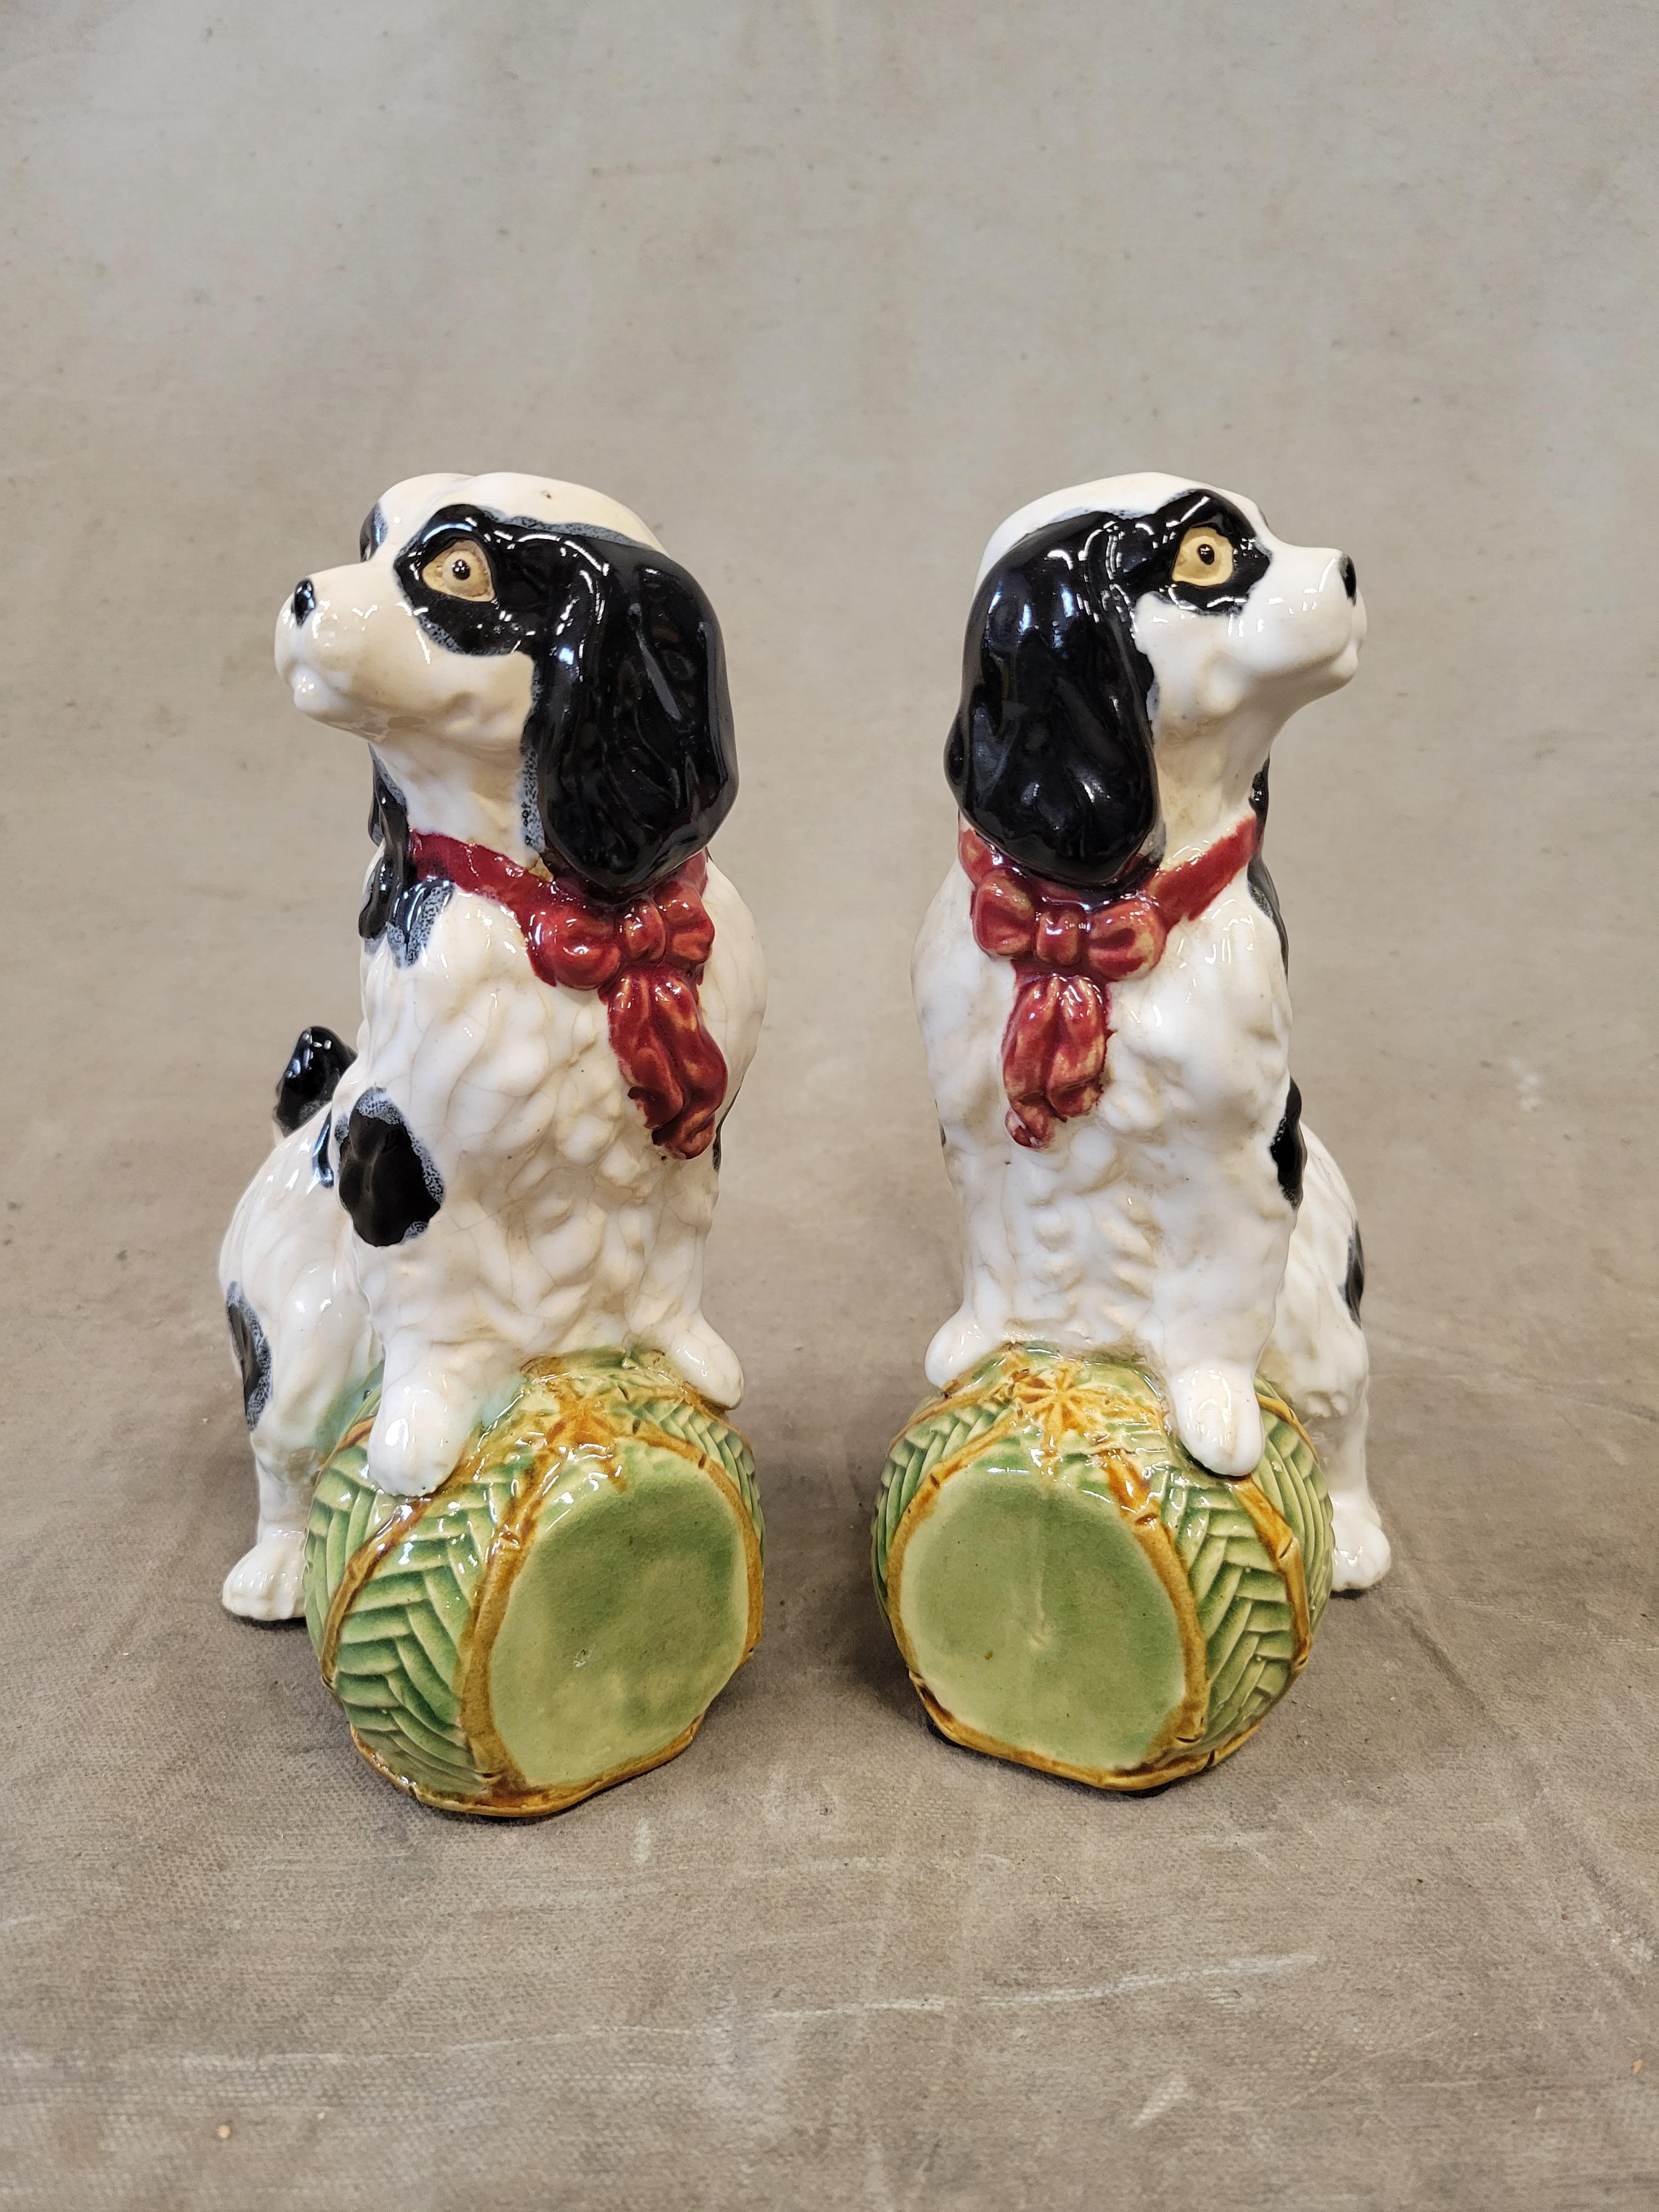 A charming pair of vintage majolica Staffordshire Cavalier King Charles Spaniel Bookends. The black and white dogs with a red collars rest their paws on green and yellow bamboo balls. A colorful and sweet accent for any dog lover.
Condition